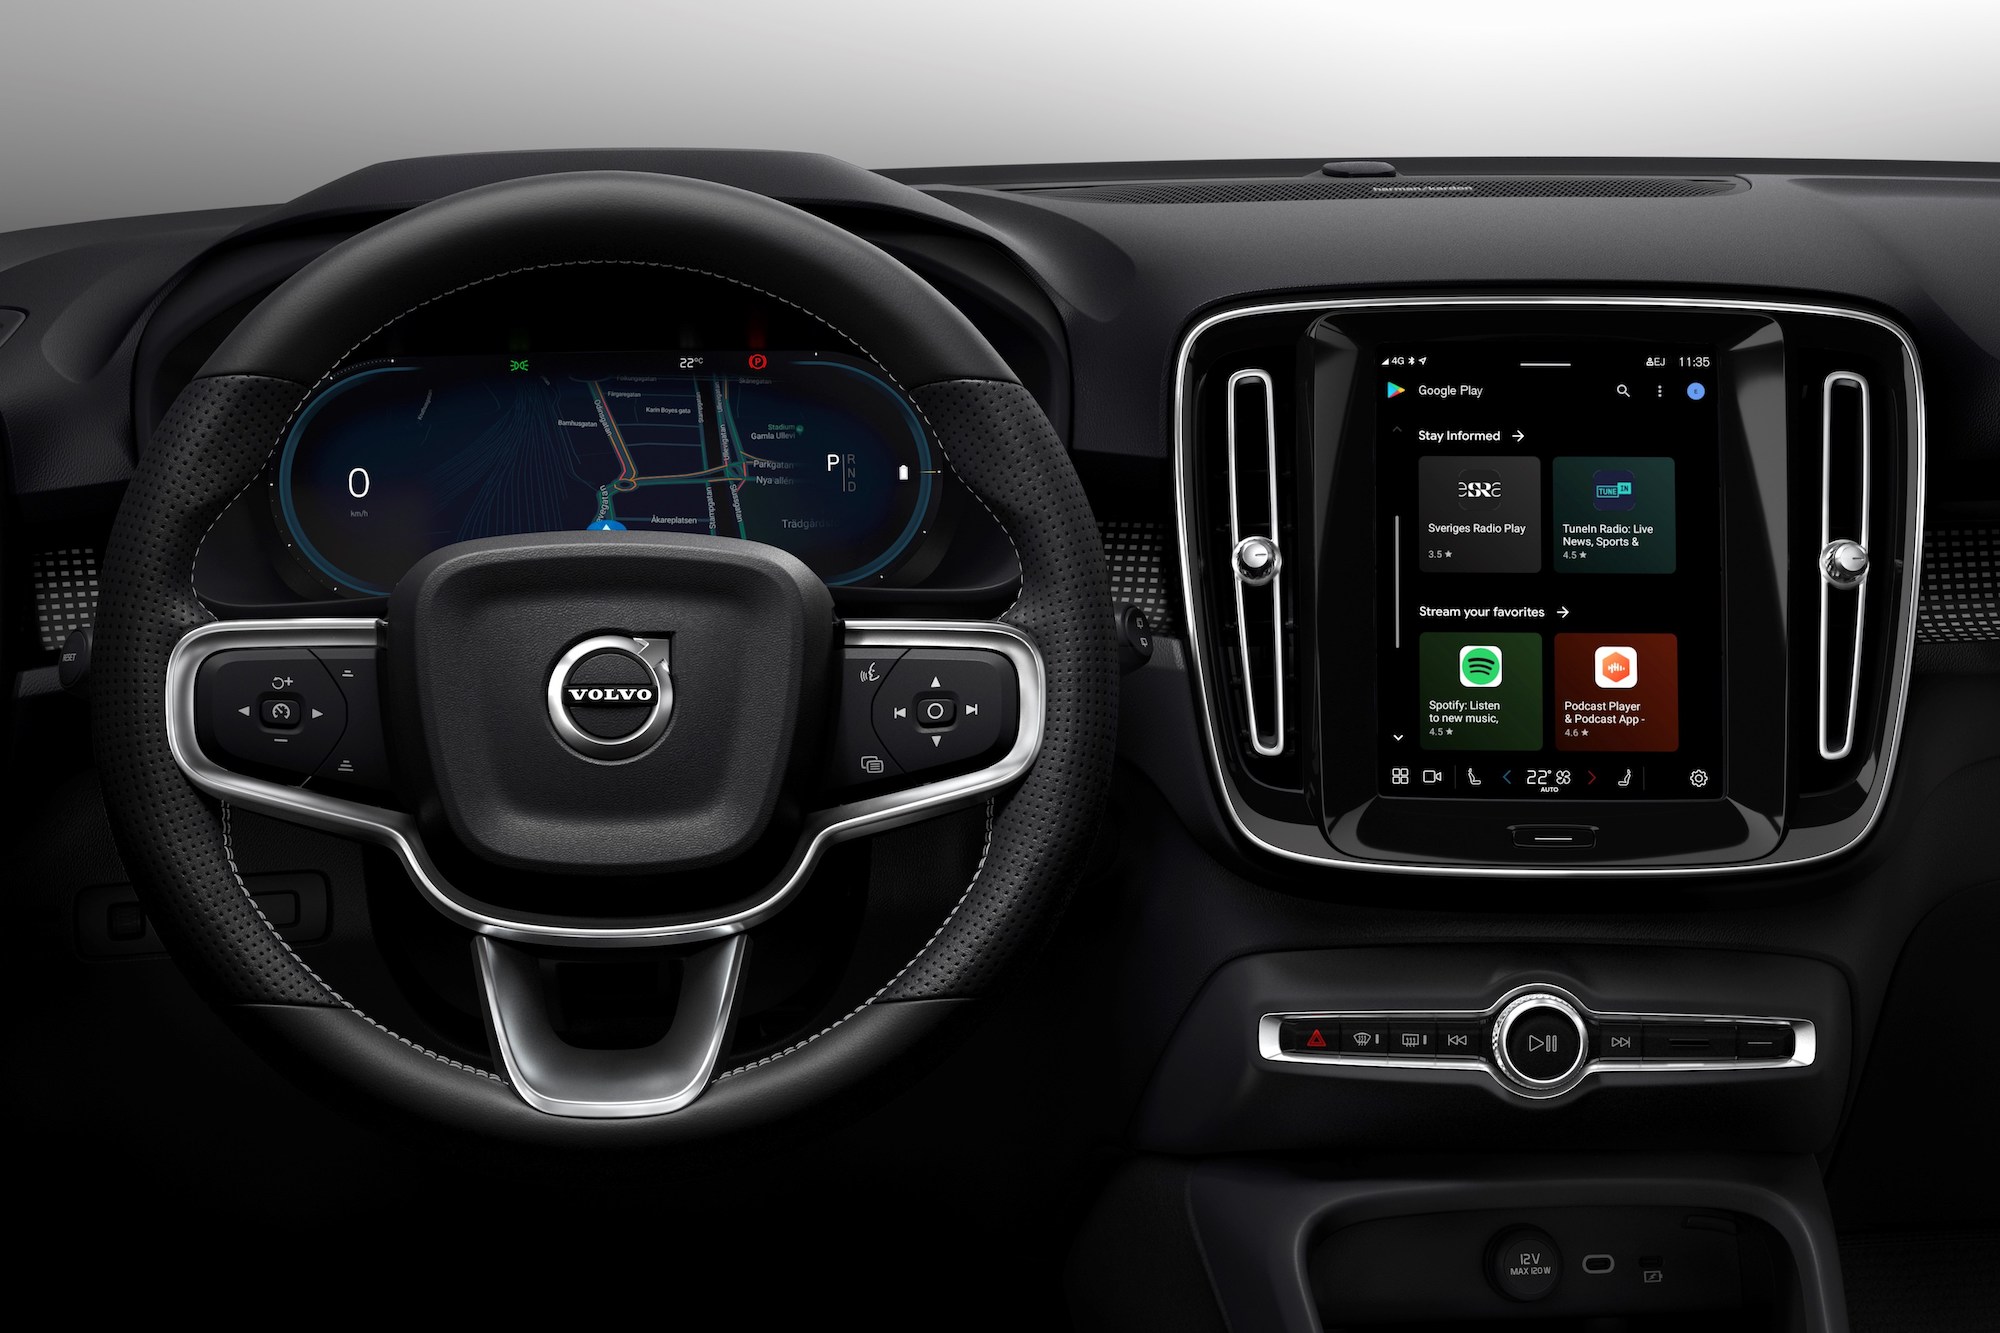 The all-electric Volvo XC40 introduces an all-new infotainment system